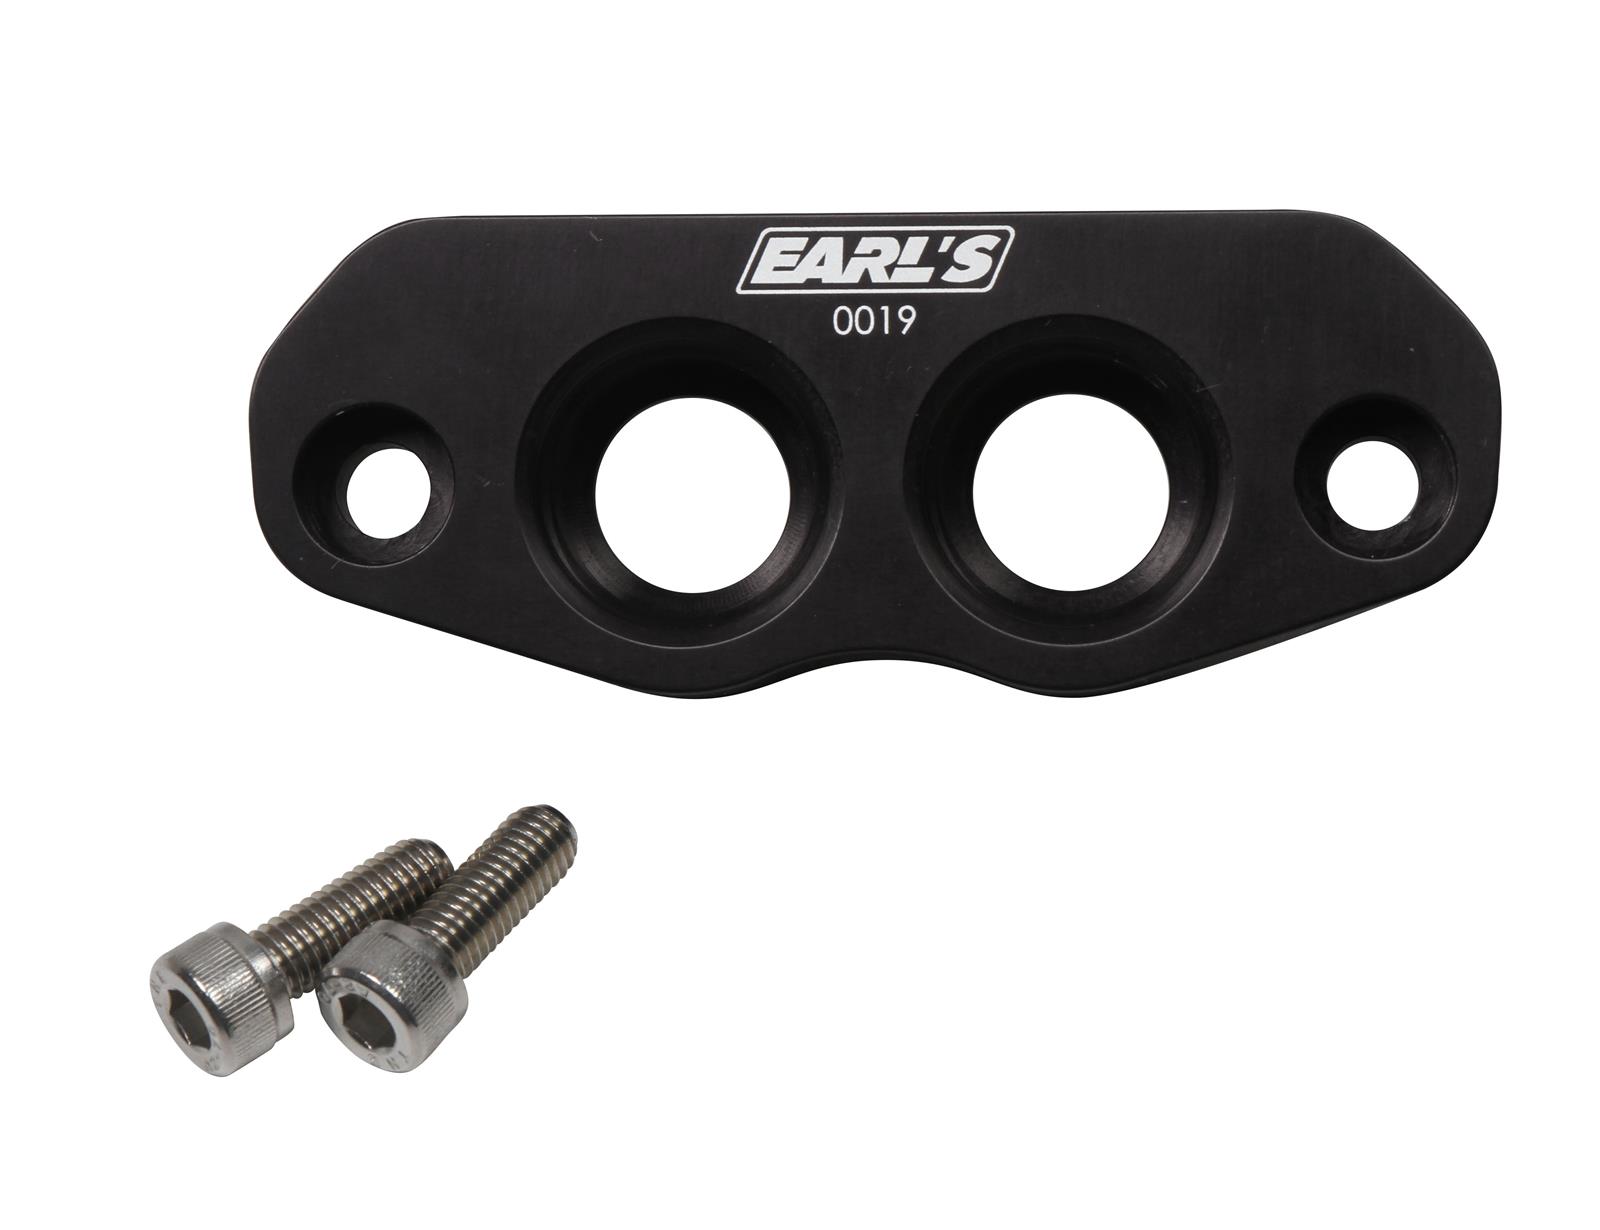 www.americanspareparts.de - BY-PASS ADAPTERS